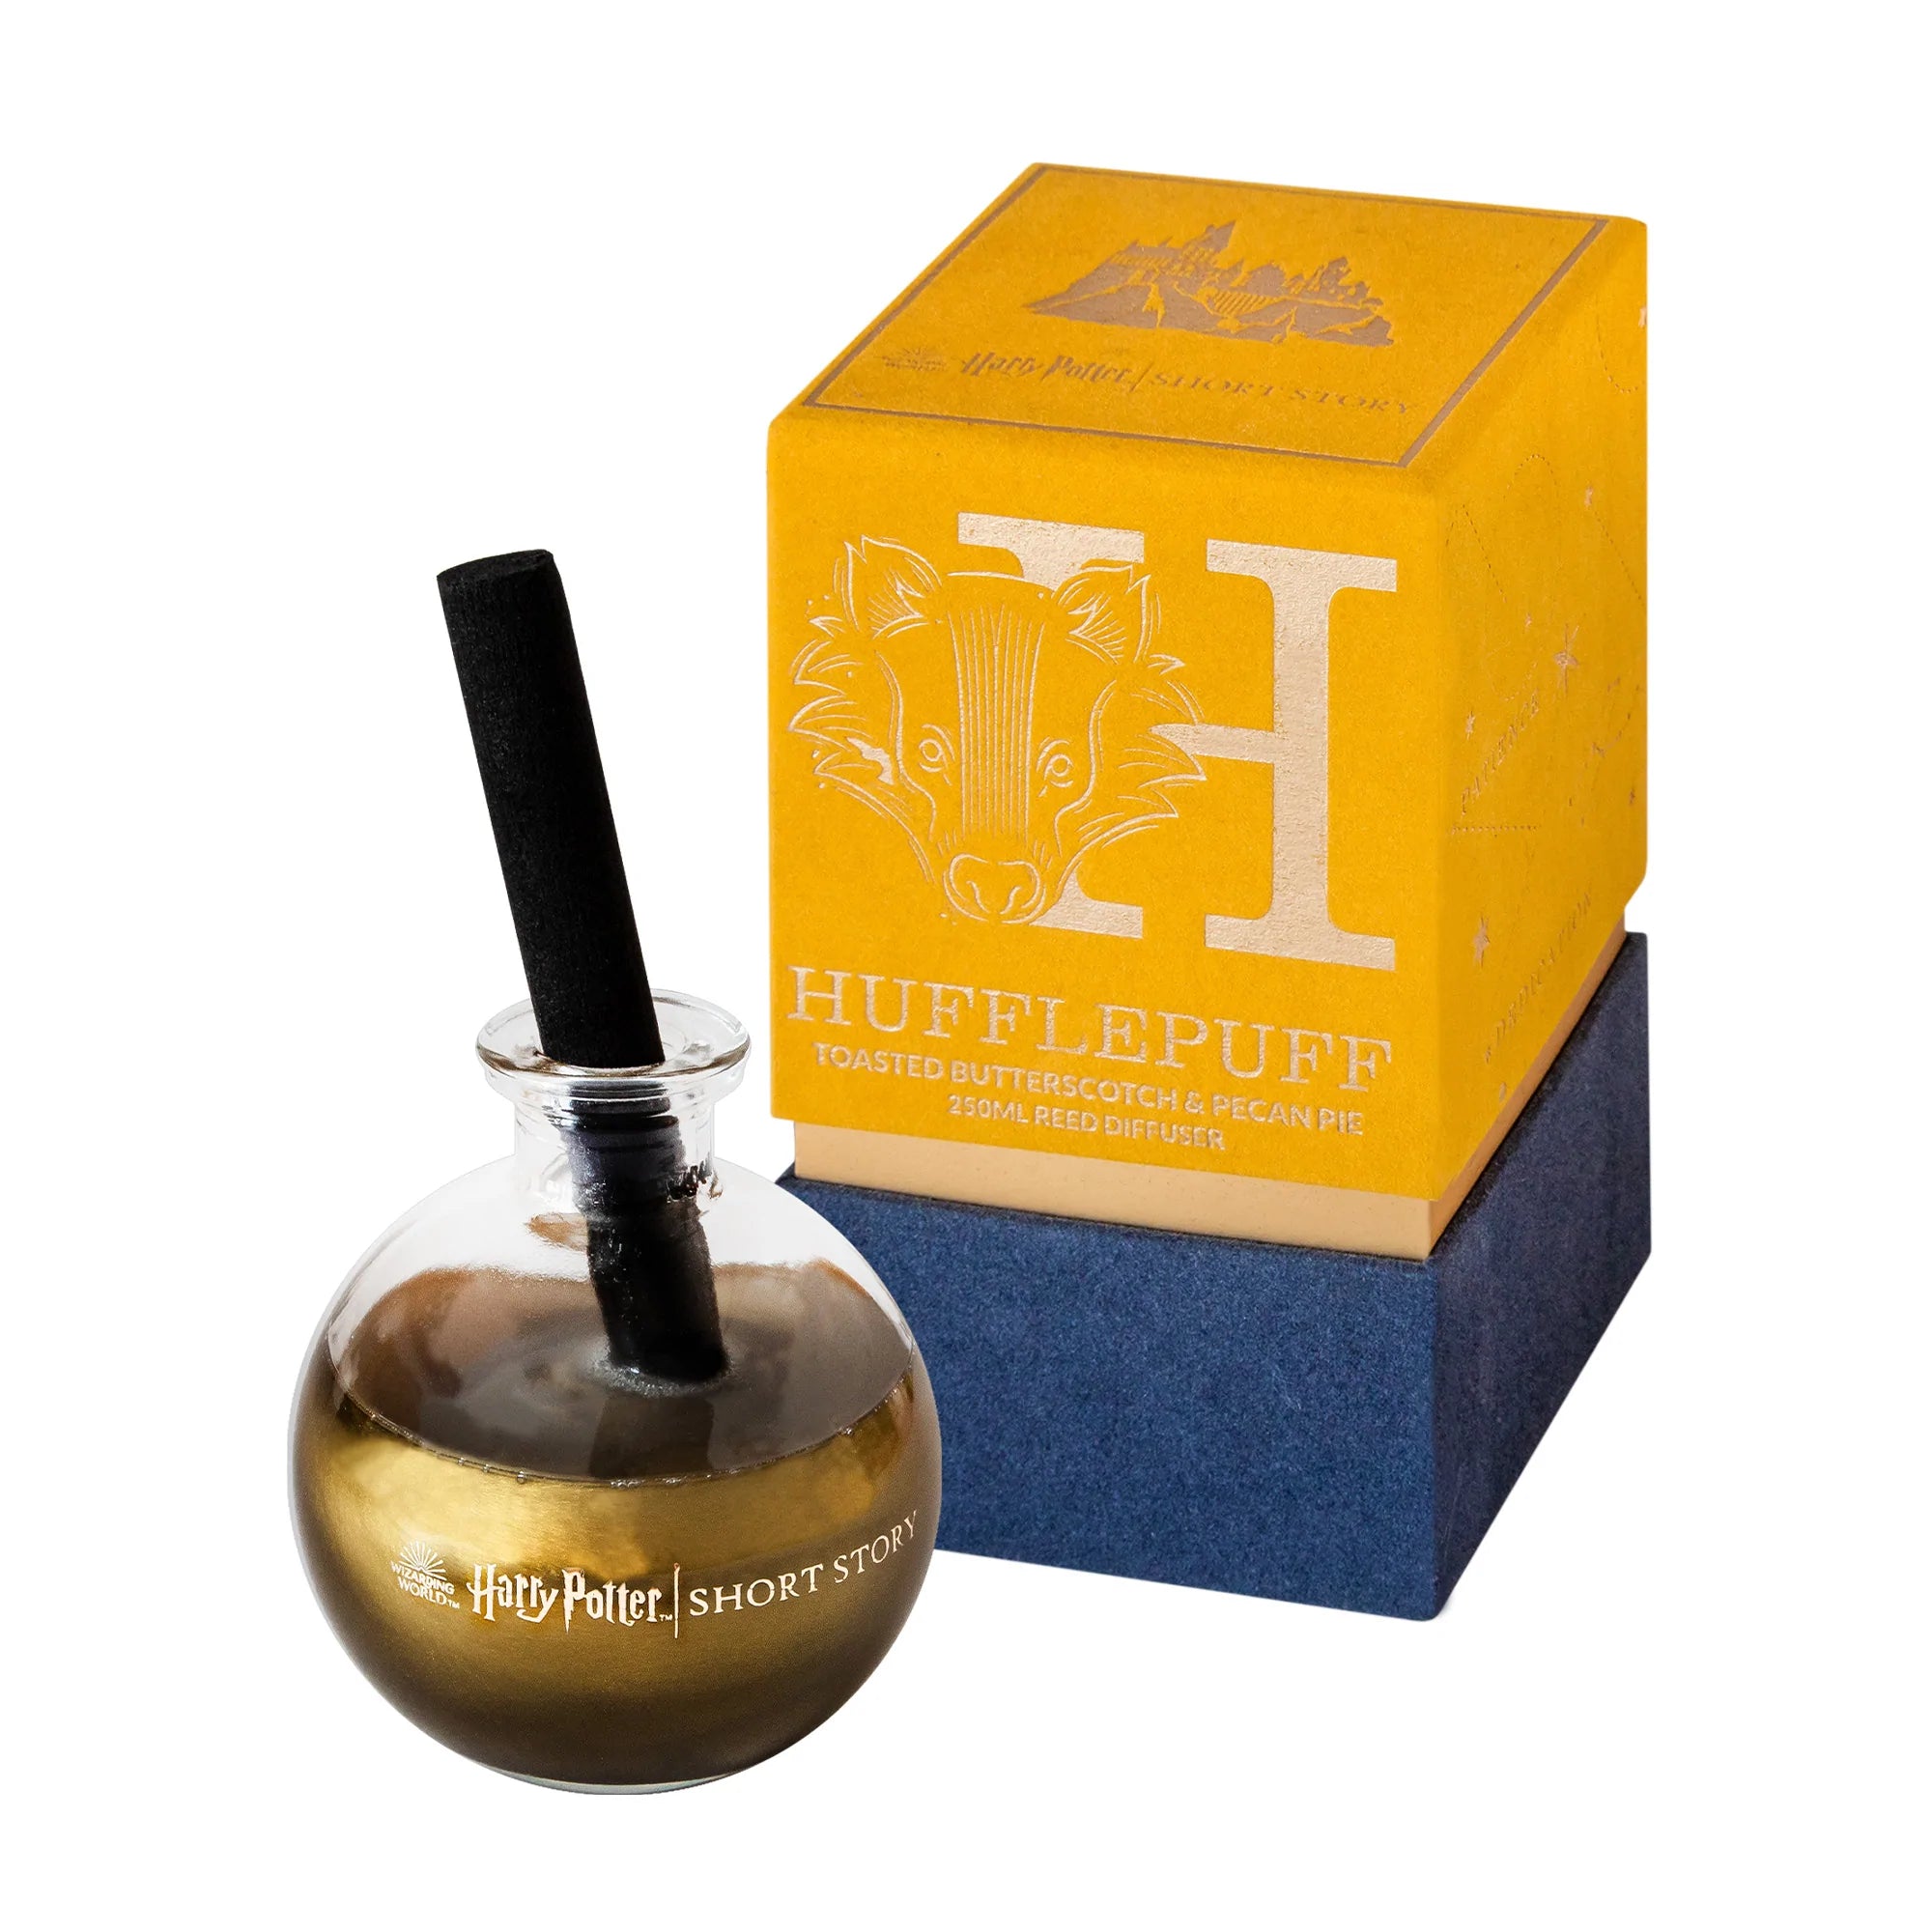 Harry Potter Diffuser - Hufflepuff (Toasted Butterscotch & Pecan Pie)